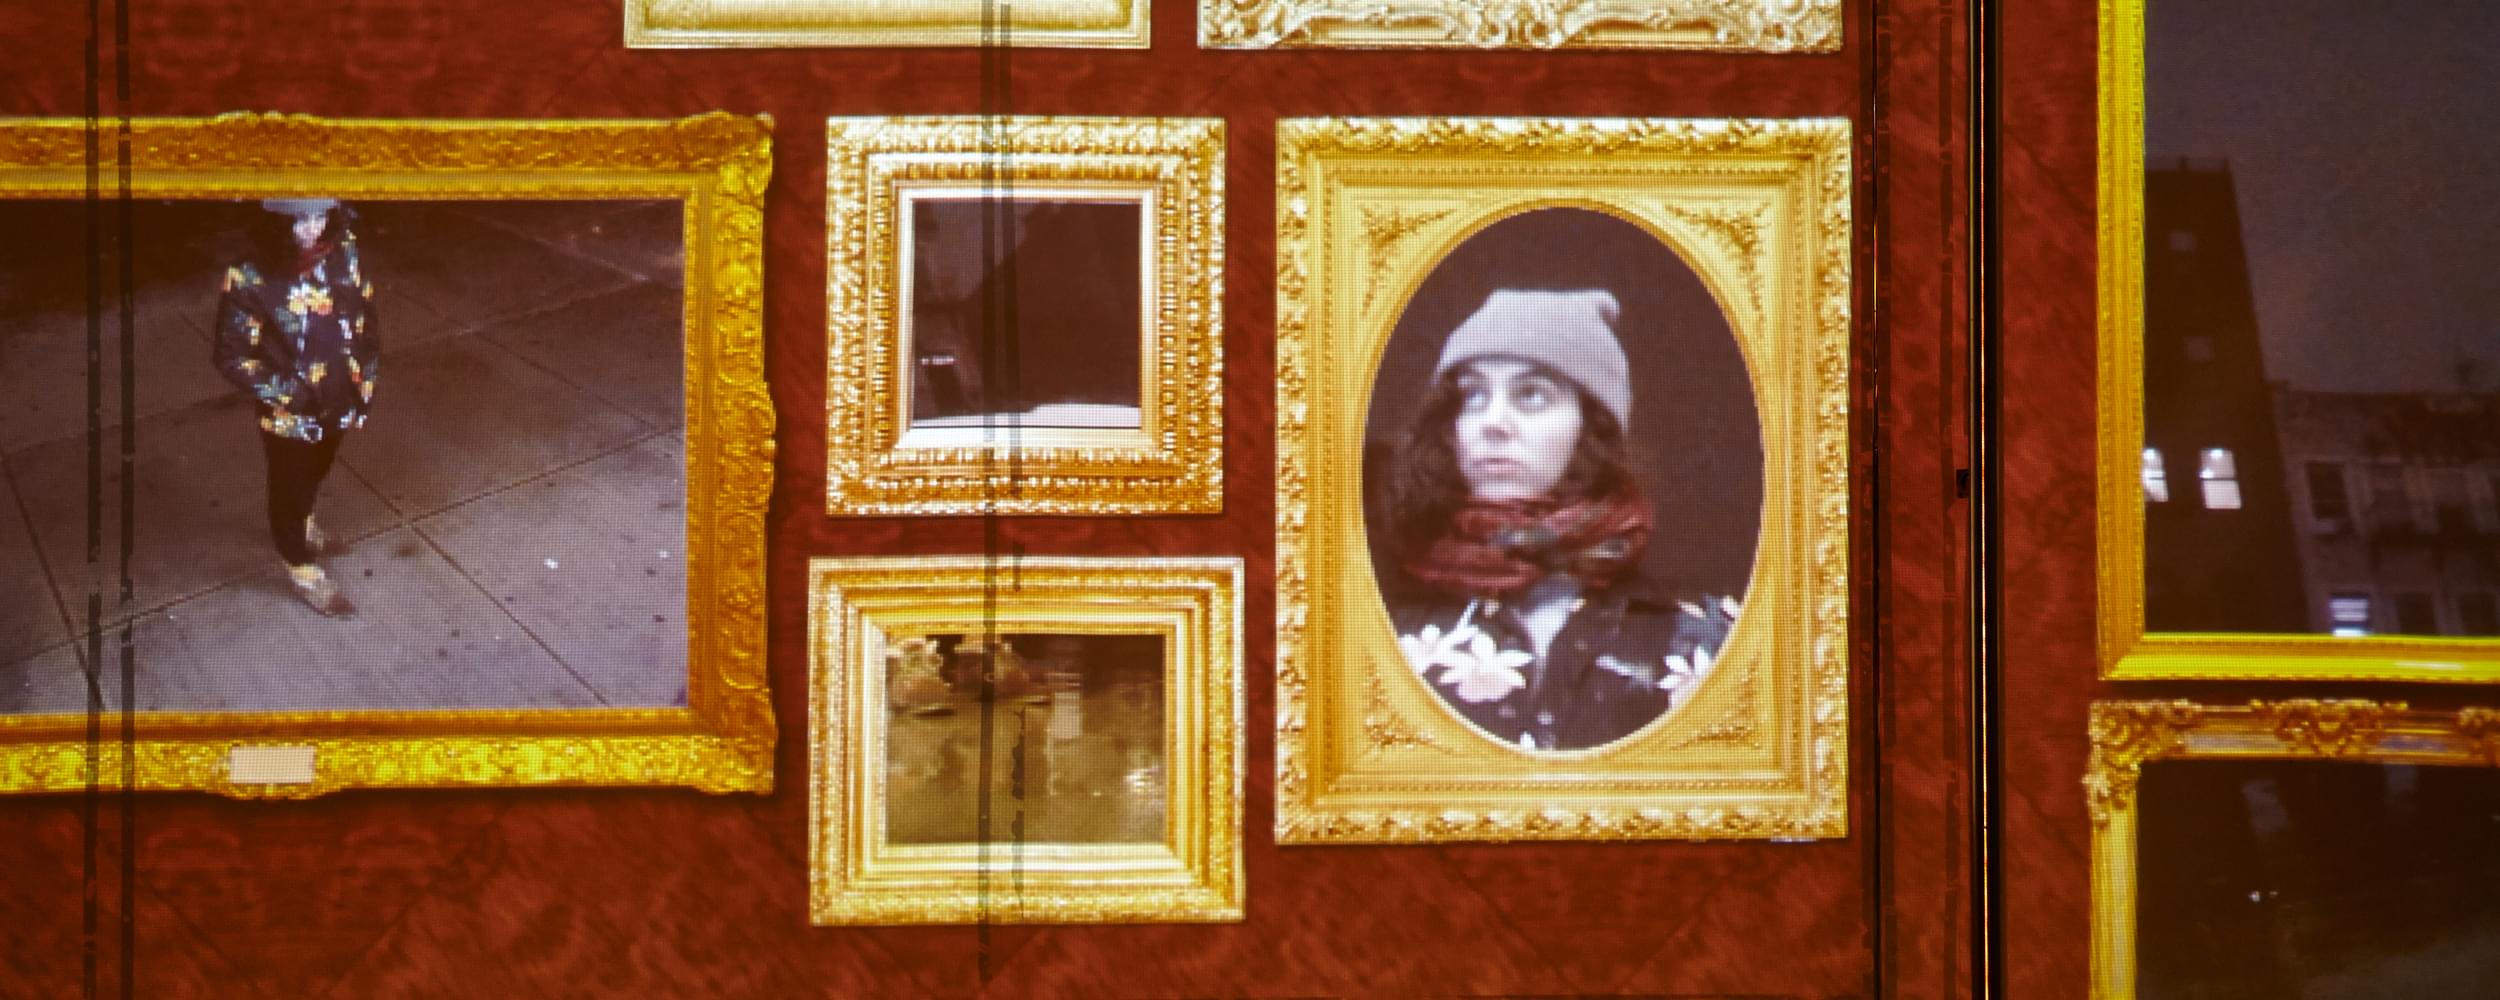 Close up photograph showing a projected image of about 10 ornately decorated golden frames, Baroque style, where the contents of each frame is a slice of the external environment. For example, in the leftmost bottom frame shows a video of a person on the sidewalk from a top down view, the leftmost upper frame shows a closeup of that person's sneakers, while a few frames over to the right shows a close up of that viewer's face. The other 7 frames show different slices of the urban environment in which the viewer is in (apartment building windows in the background, a bus tire that's passing by on the street, etc.